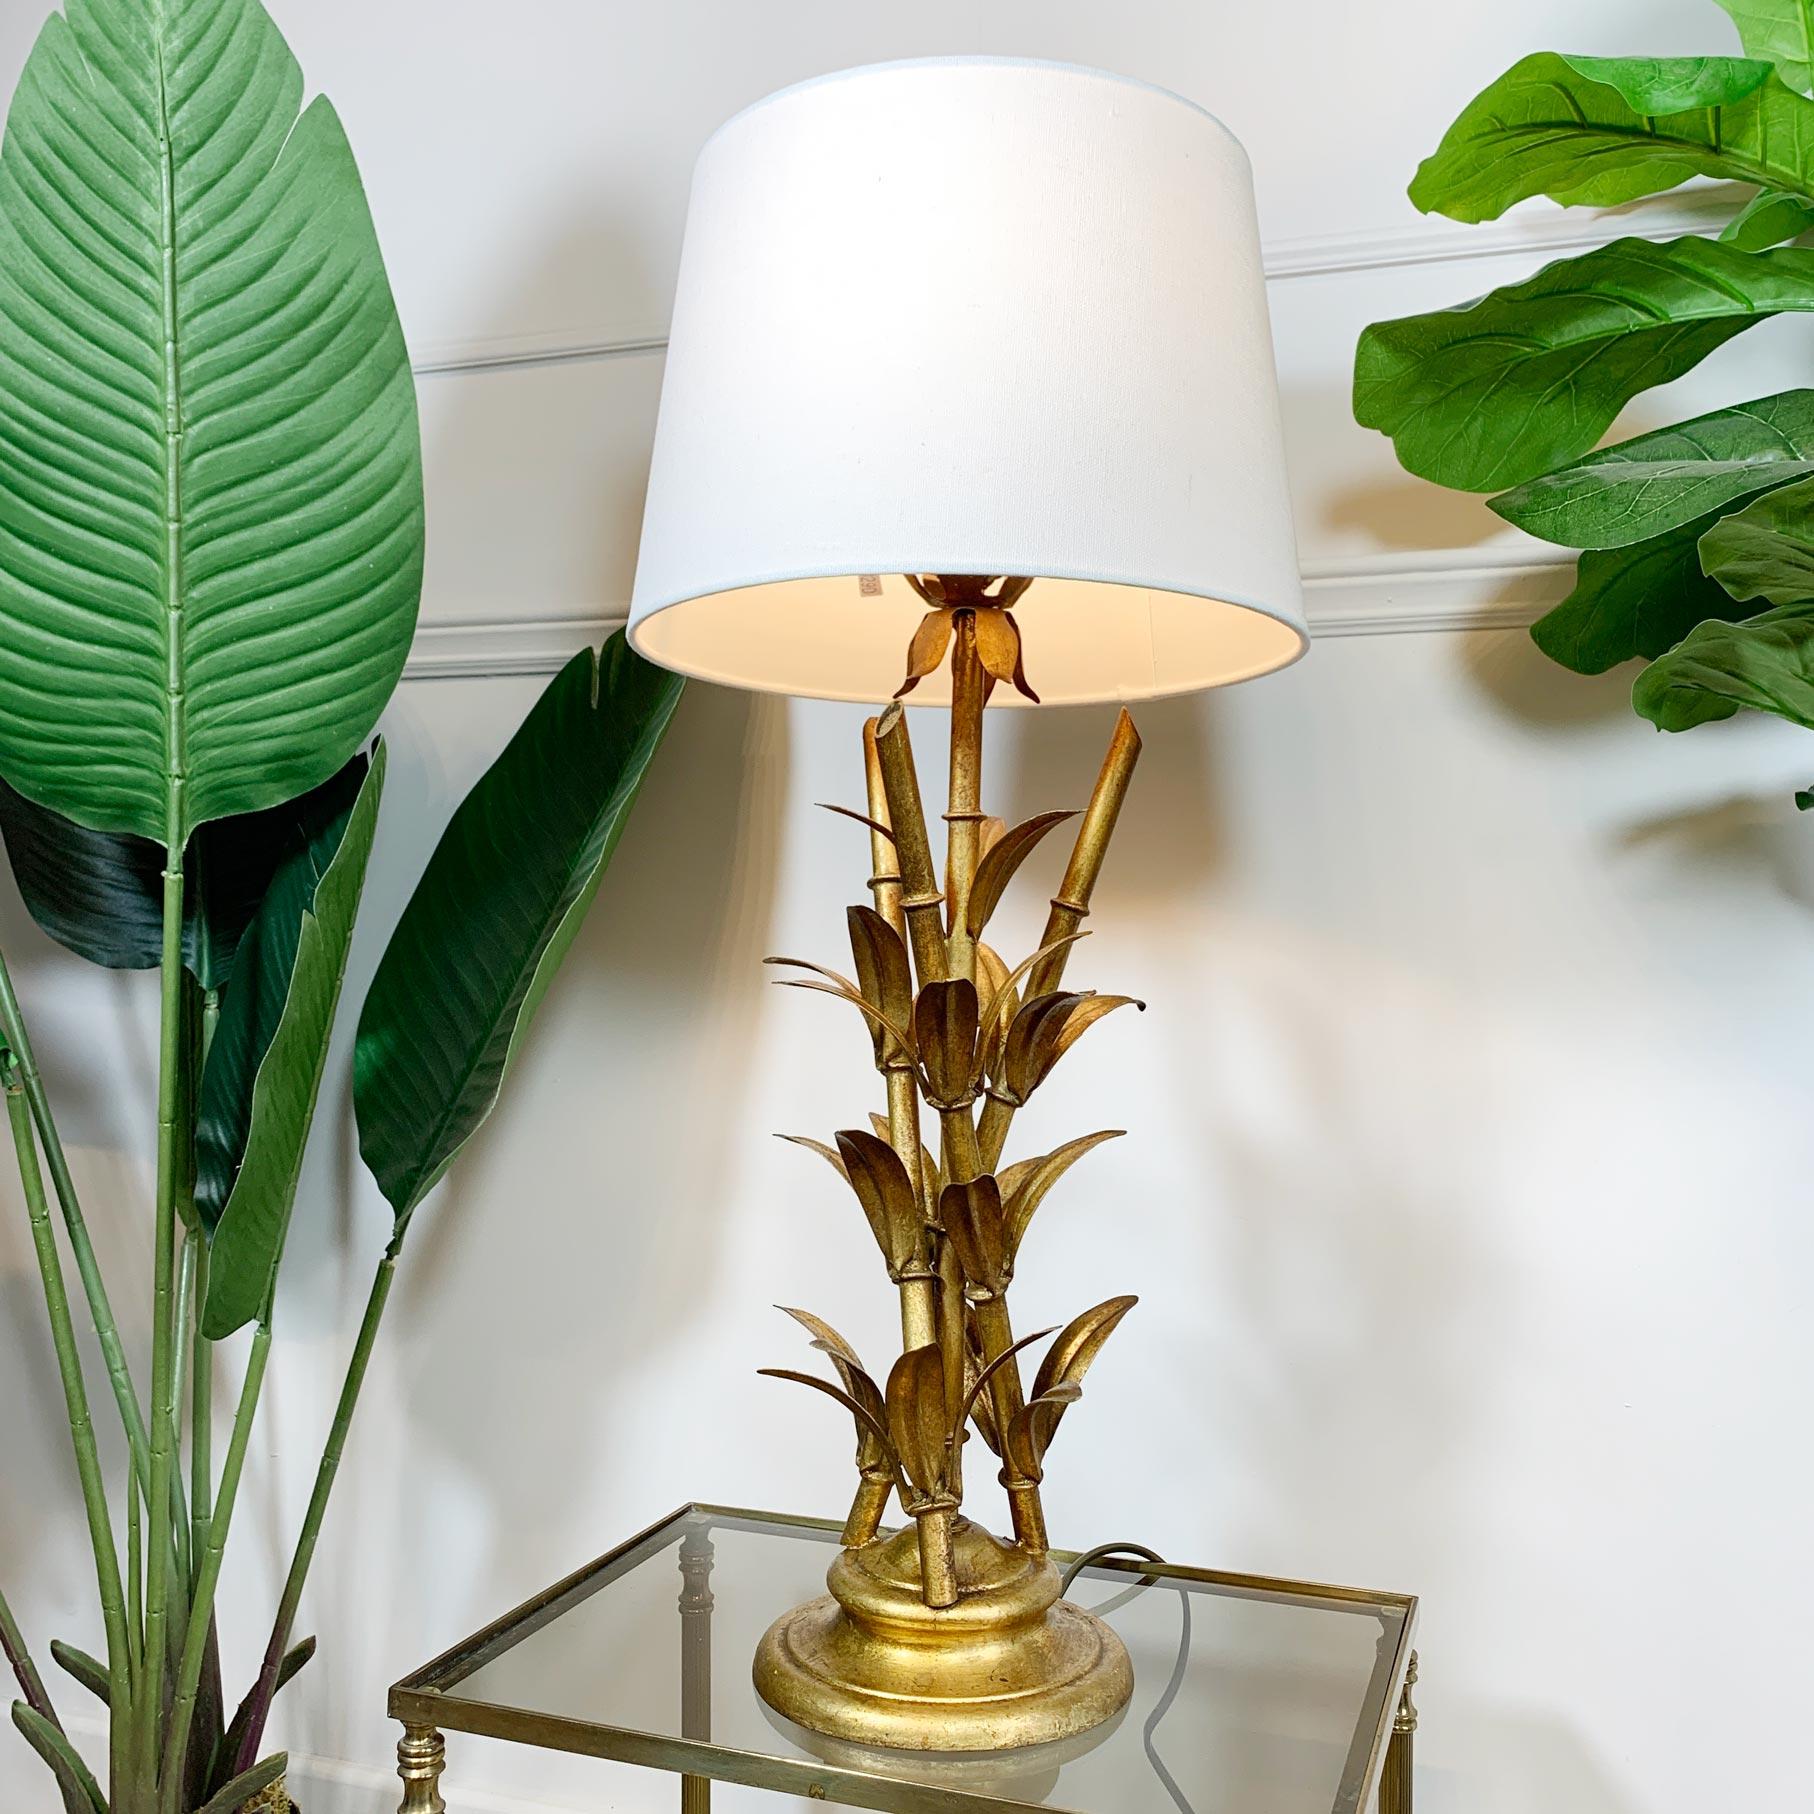 Italian Faux Bamboo Gilt Table Lamp, 1950’s For Sale 3